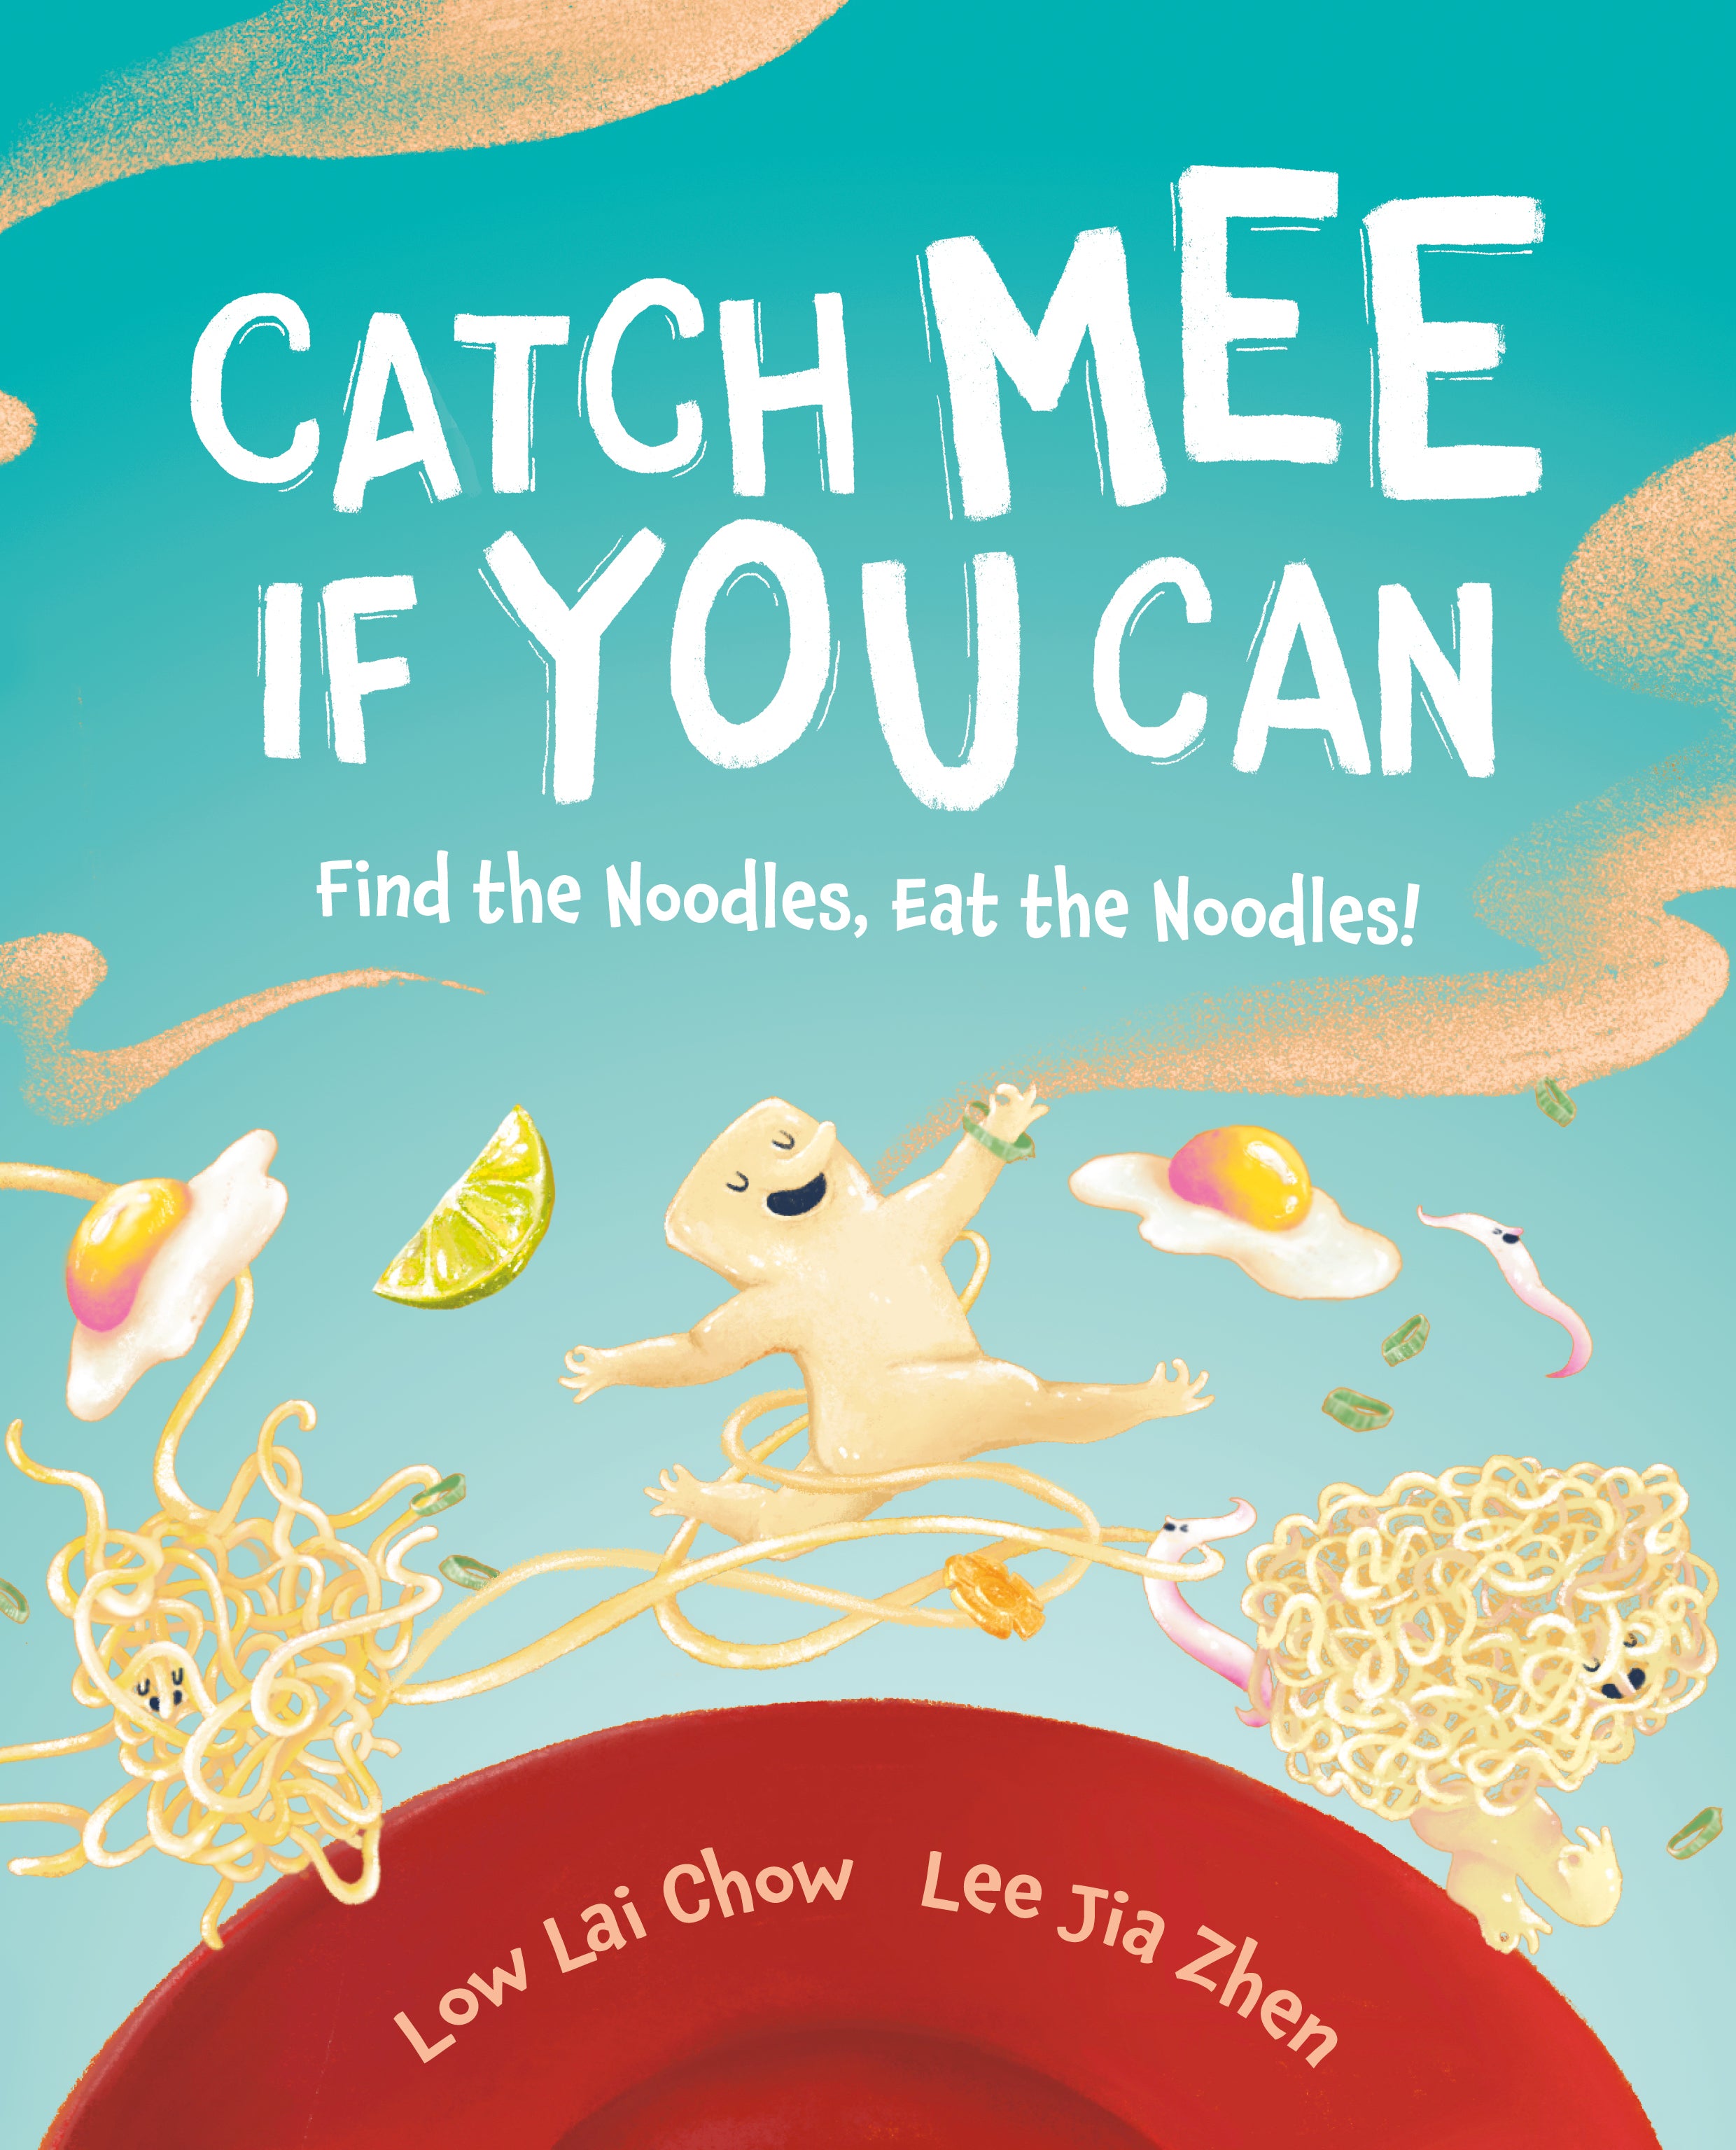 Catch Mee If You Can: Find the Noodles, Eat the Noodles!